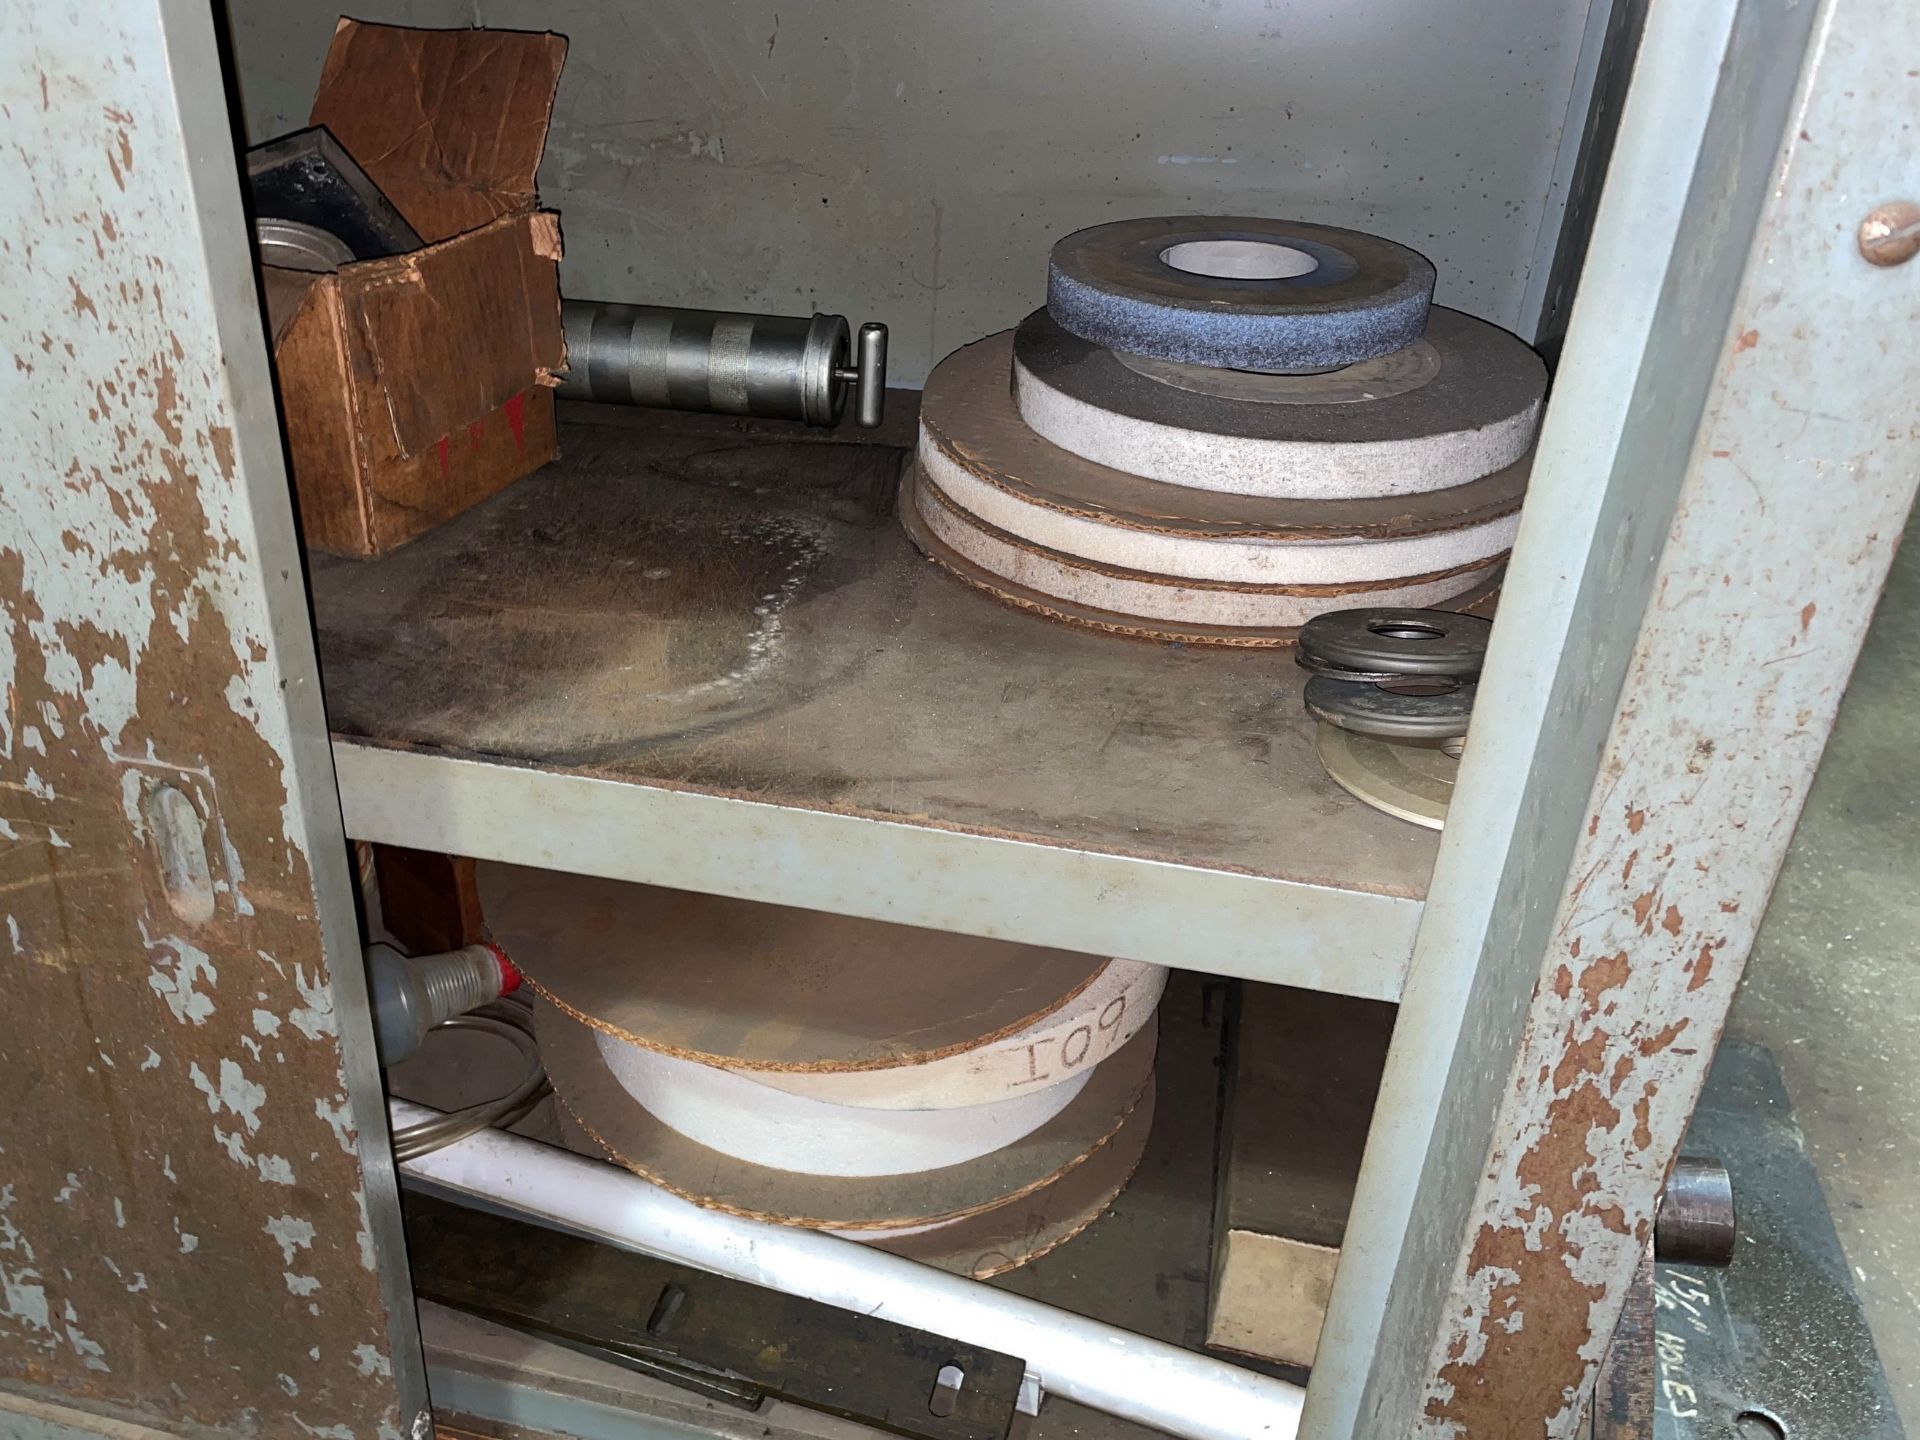 Grinding Wheels and Accessories for Blohm Surface Grinders - Image 2 of 2